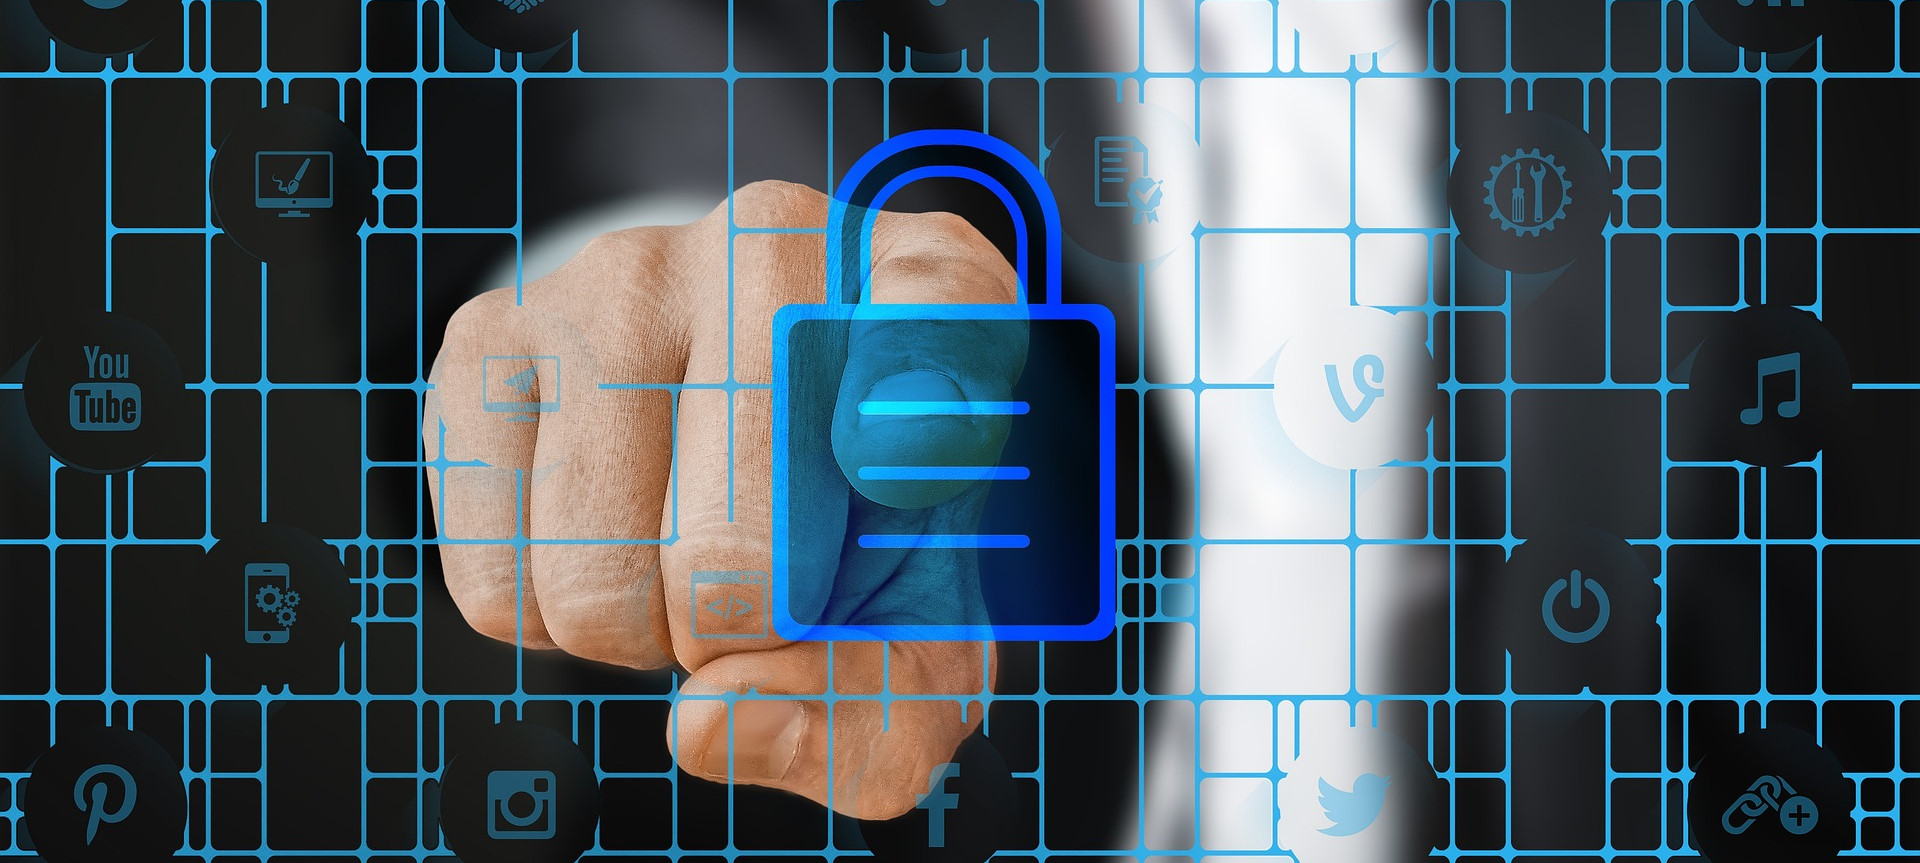 Man's finger pointing at lock with tech symbols in background